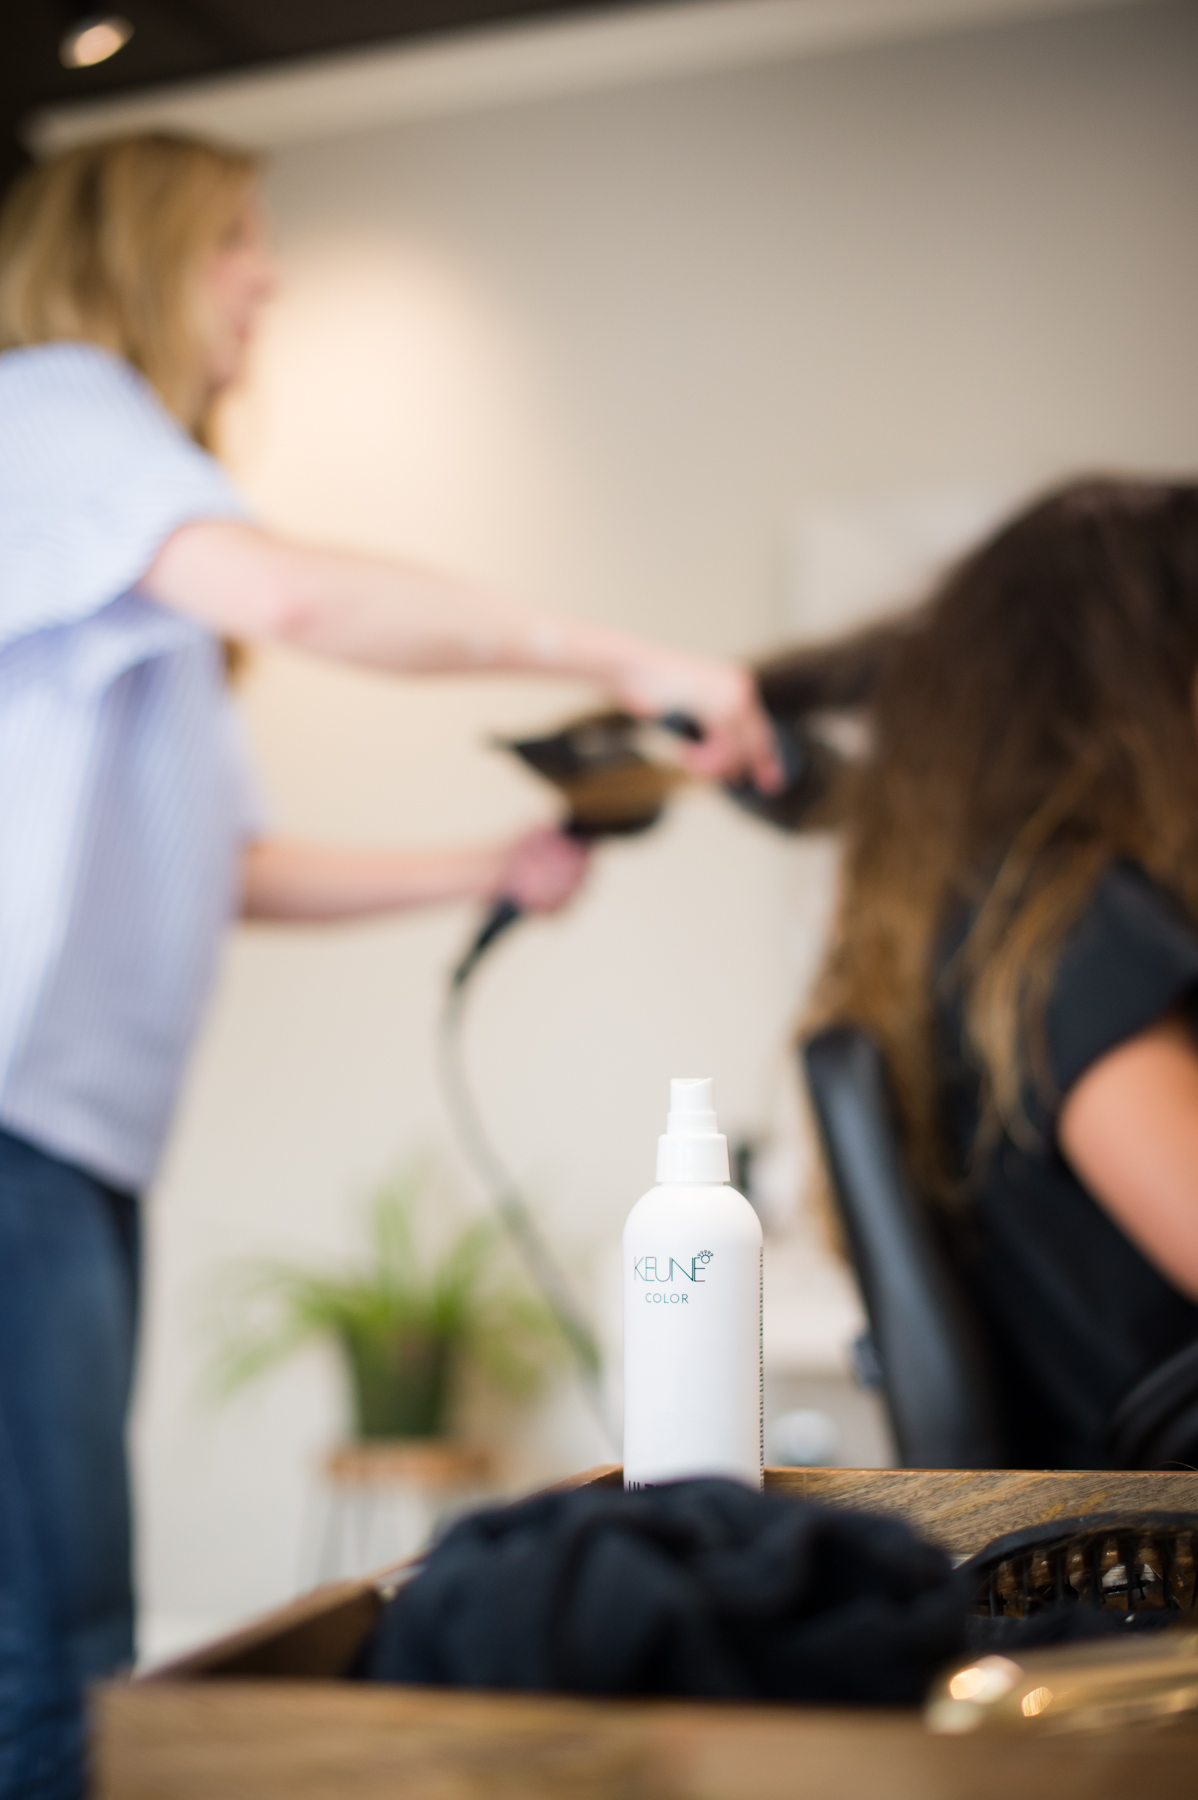 Brittany Hall blow dries a woman's hair out of focus with a bottle of hair styling product in the foreground.